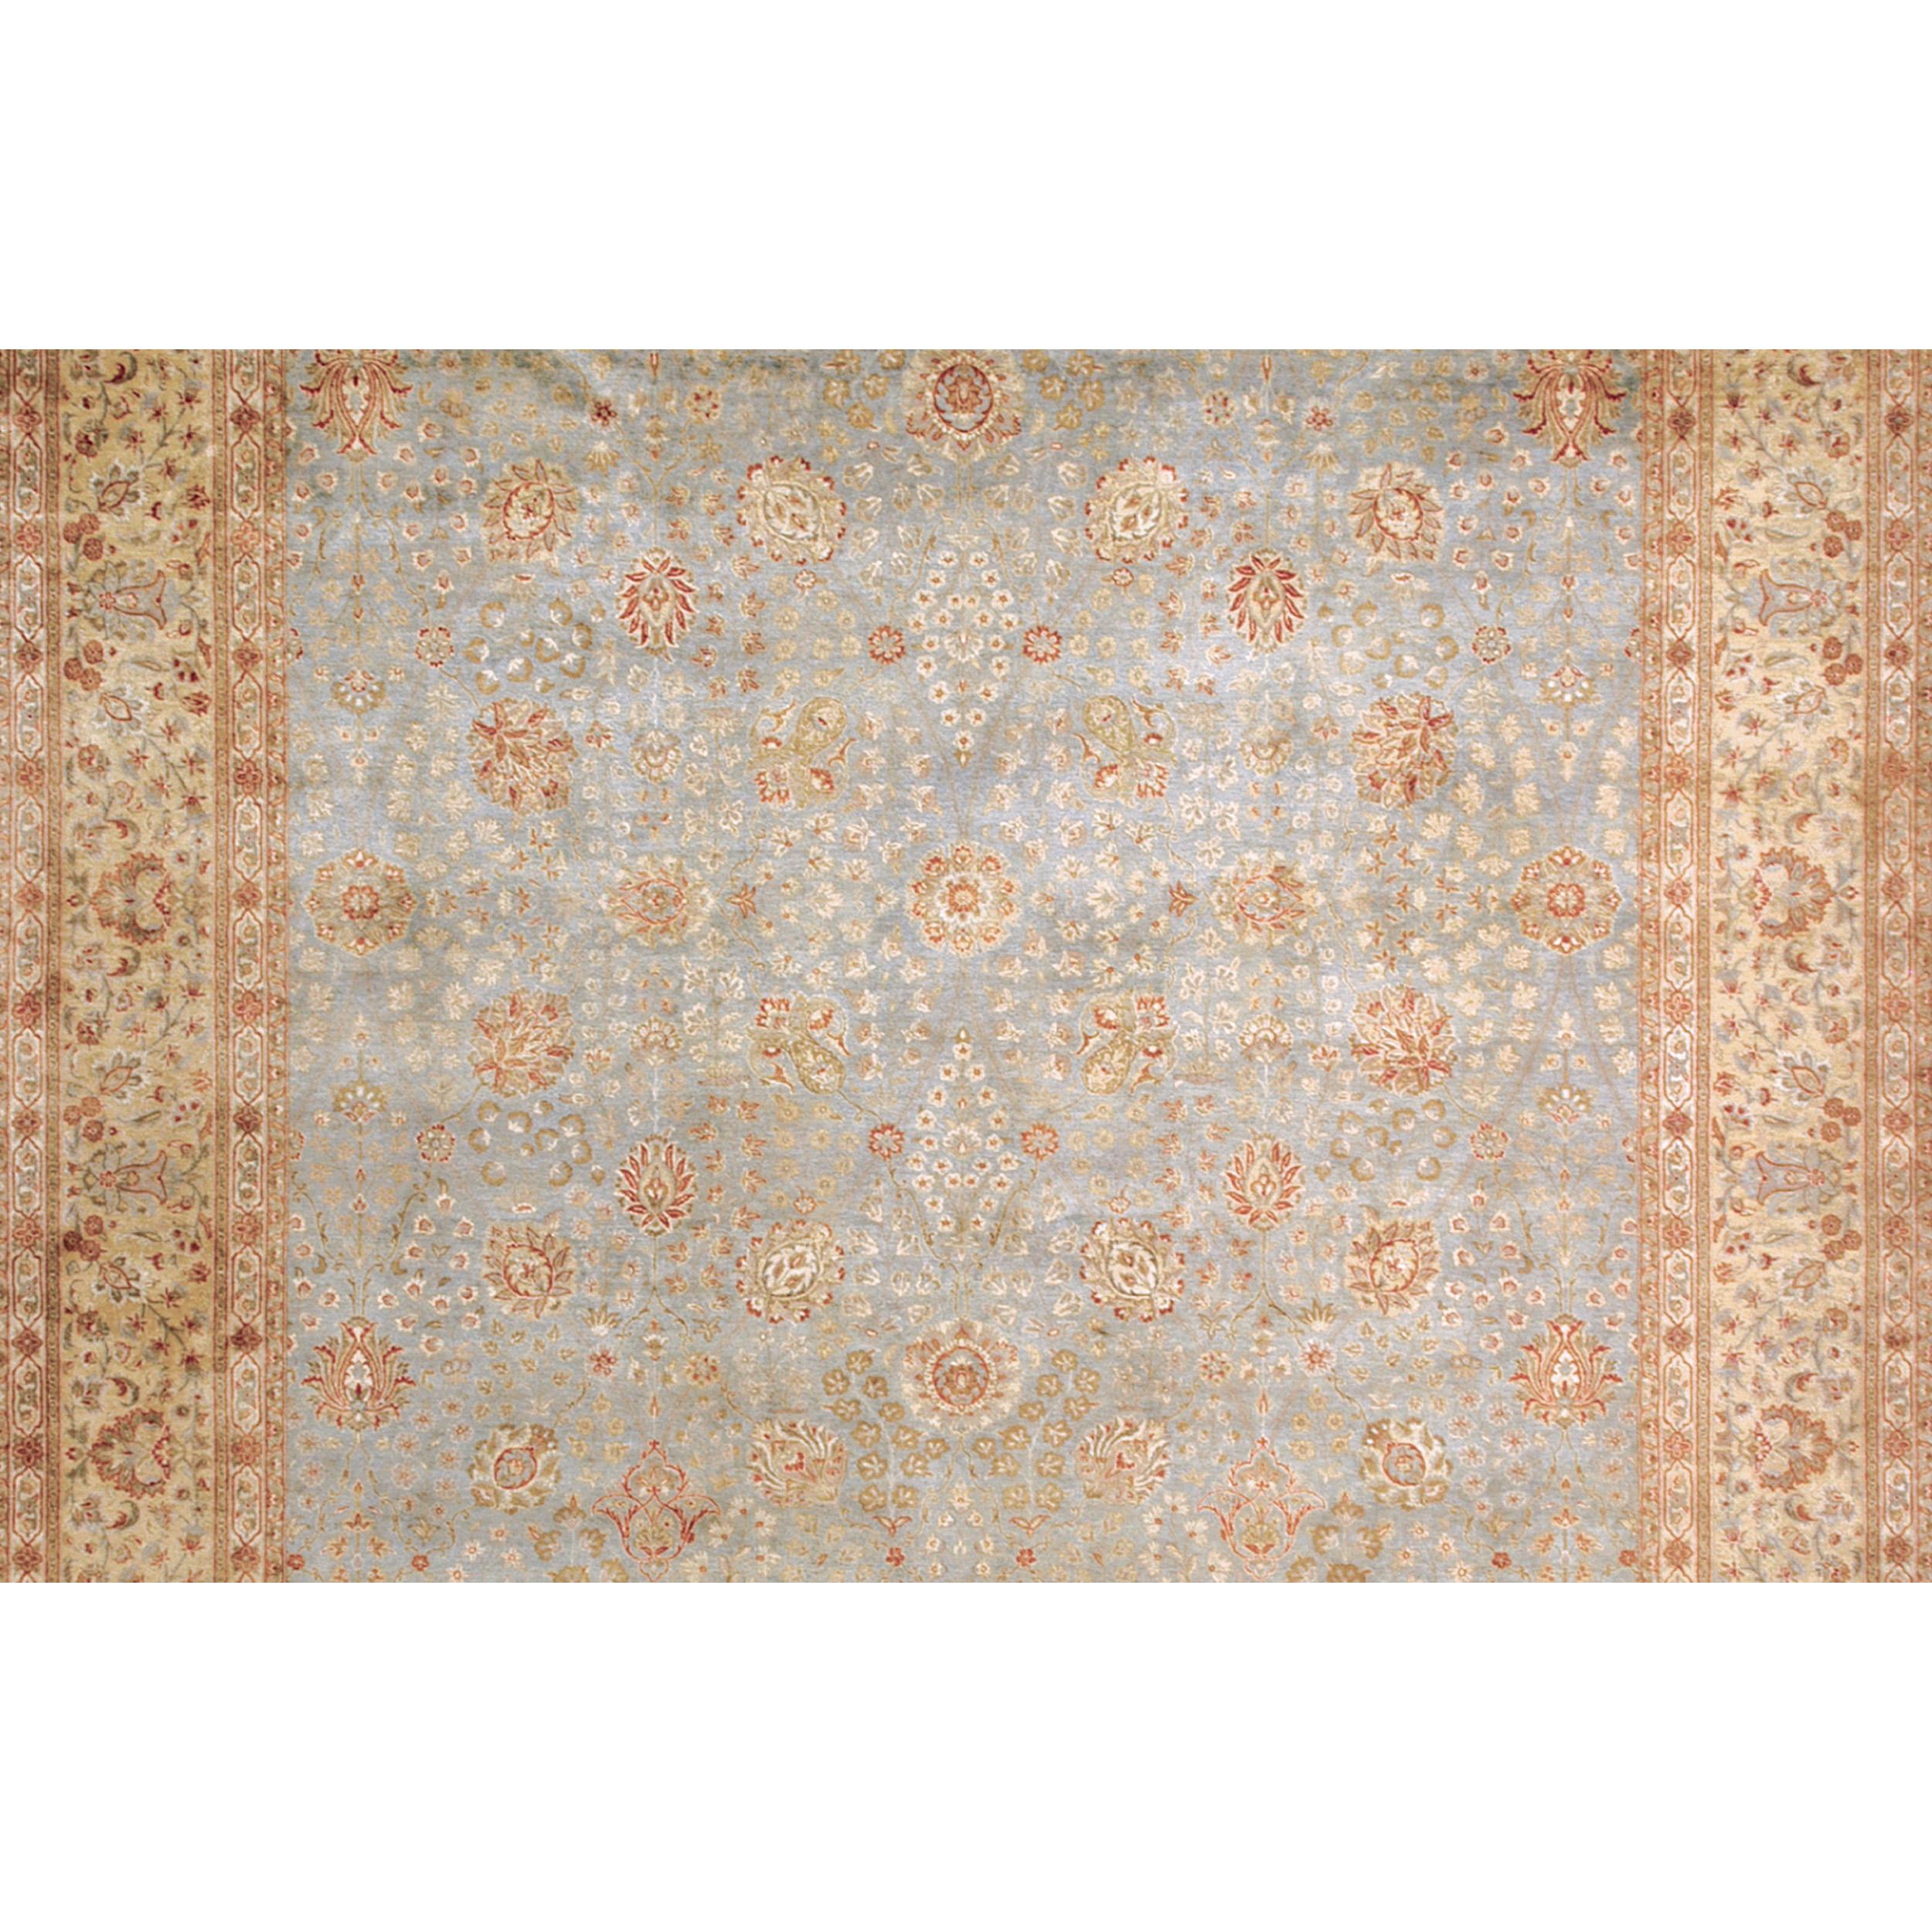 Luxury Traditional Hand-Knotted Tabriz Soft Blue and Gold 12X18 Rug In New Condition For Sale In Secaucus, NJ